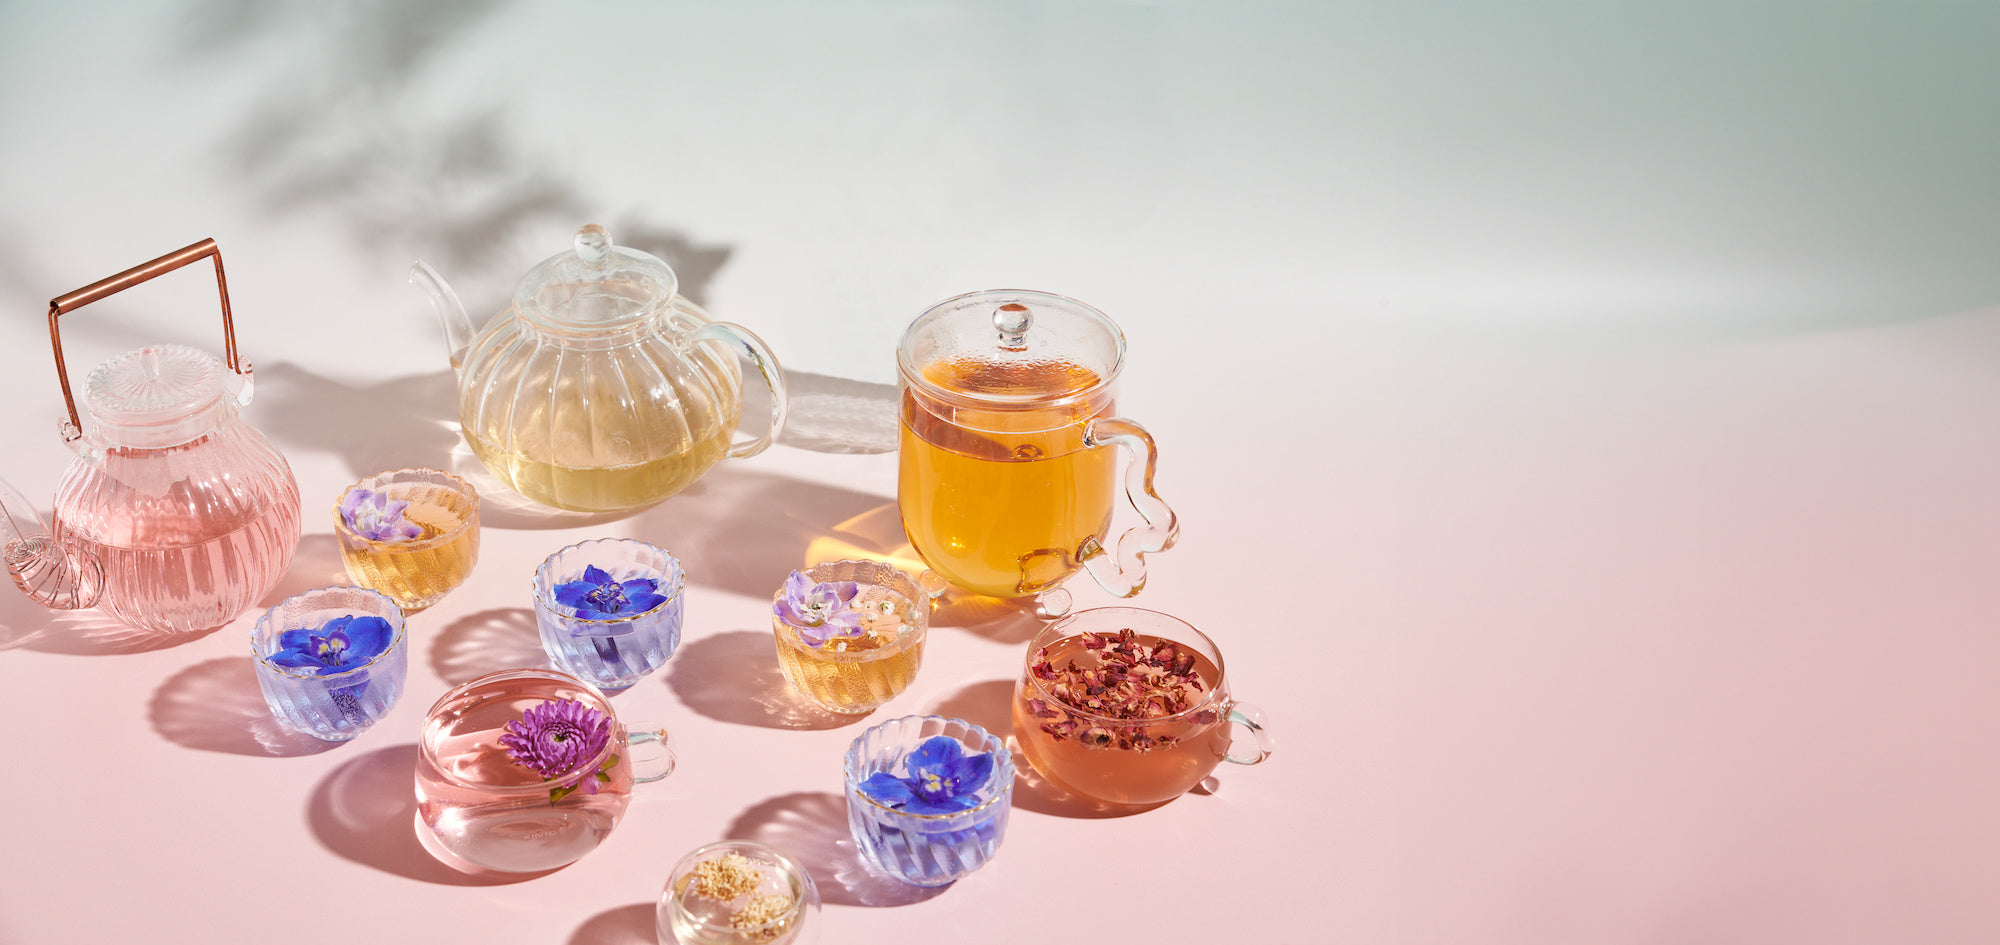 Spring and Summer Teas Fruity, Floral, and Blue Butterfly Pea Flower Tea